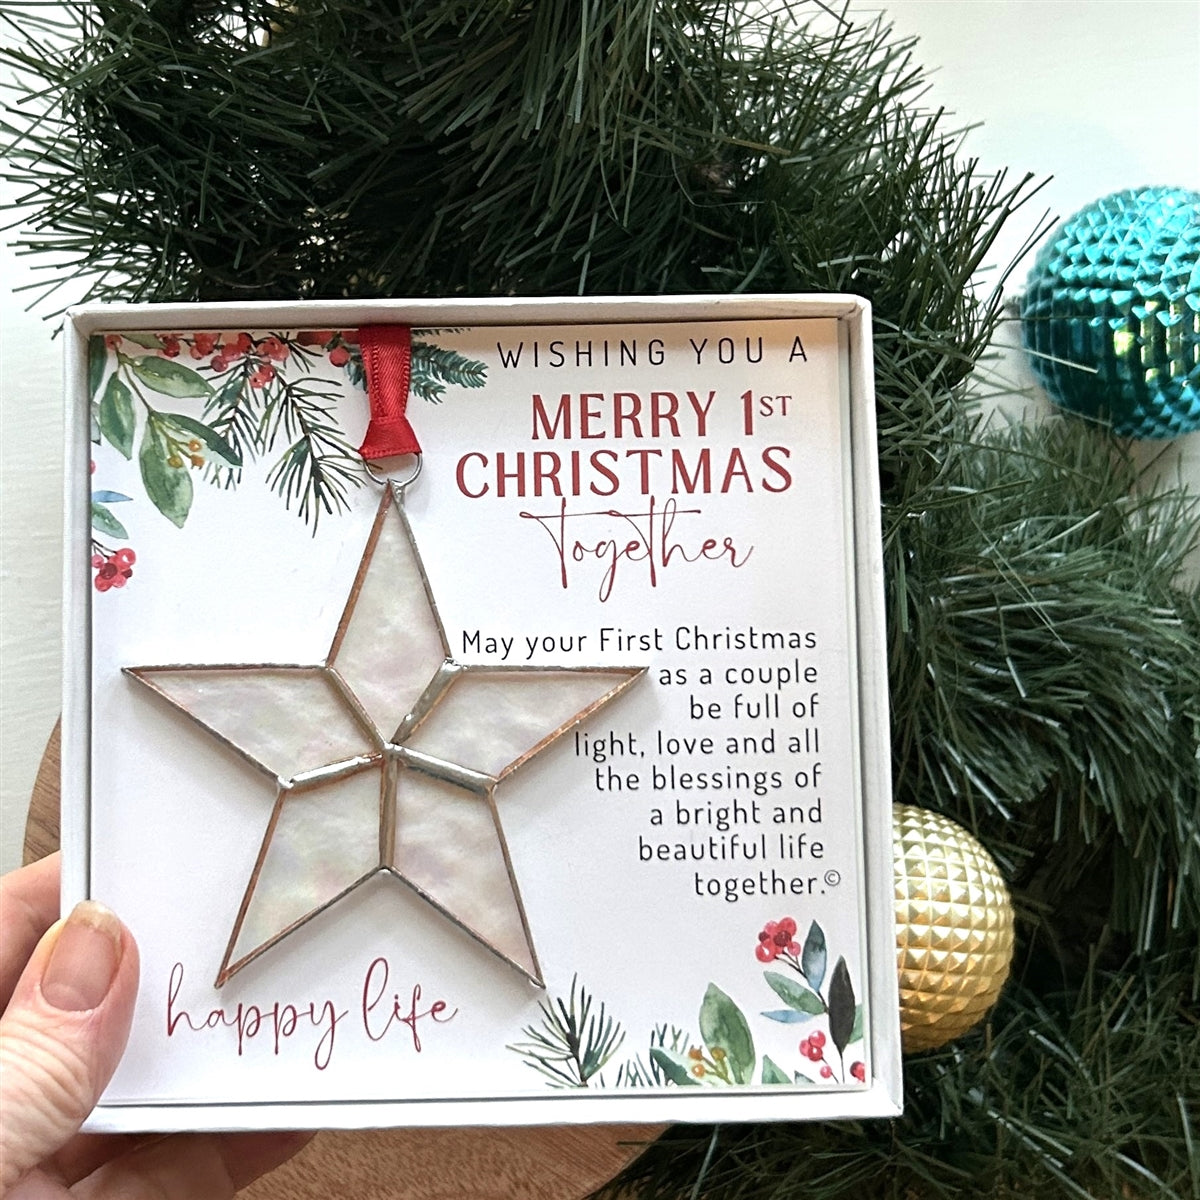 First Christmas Together star ornament boxed in Christmas setting.